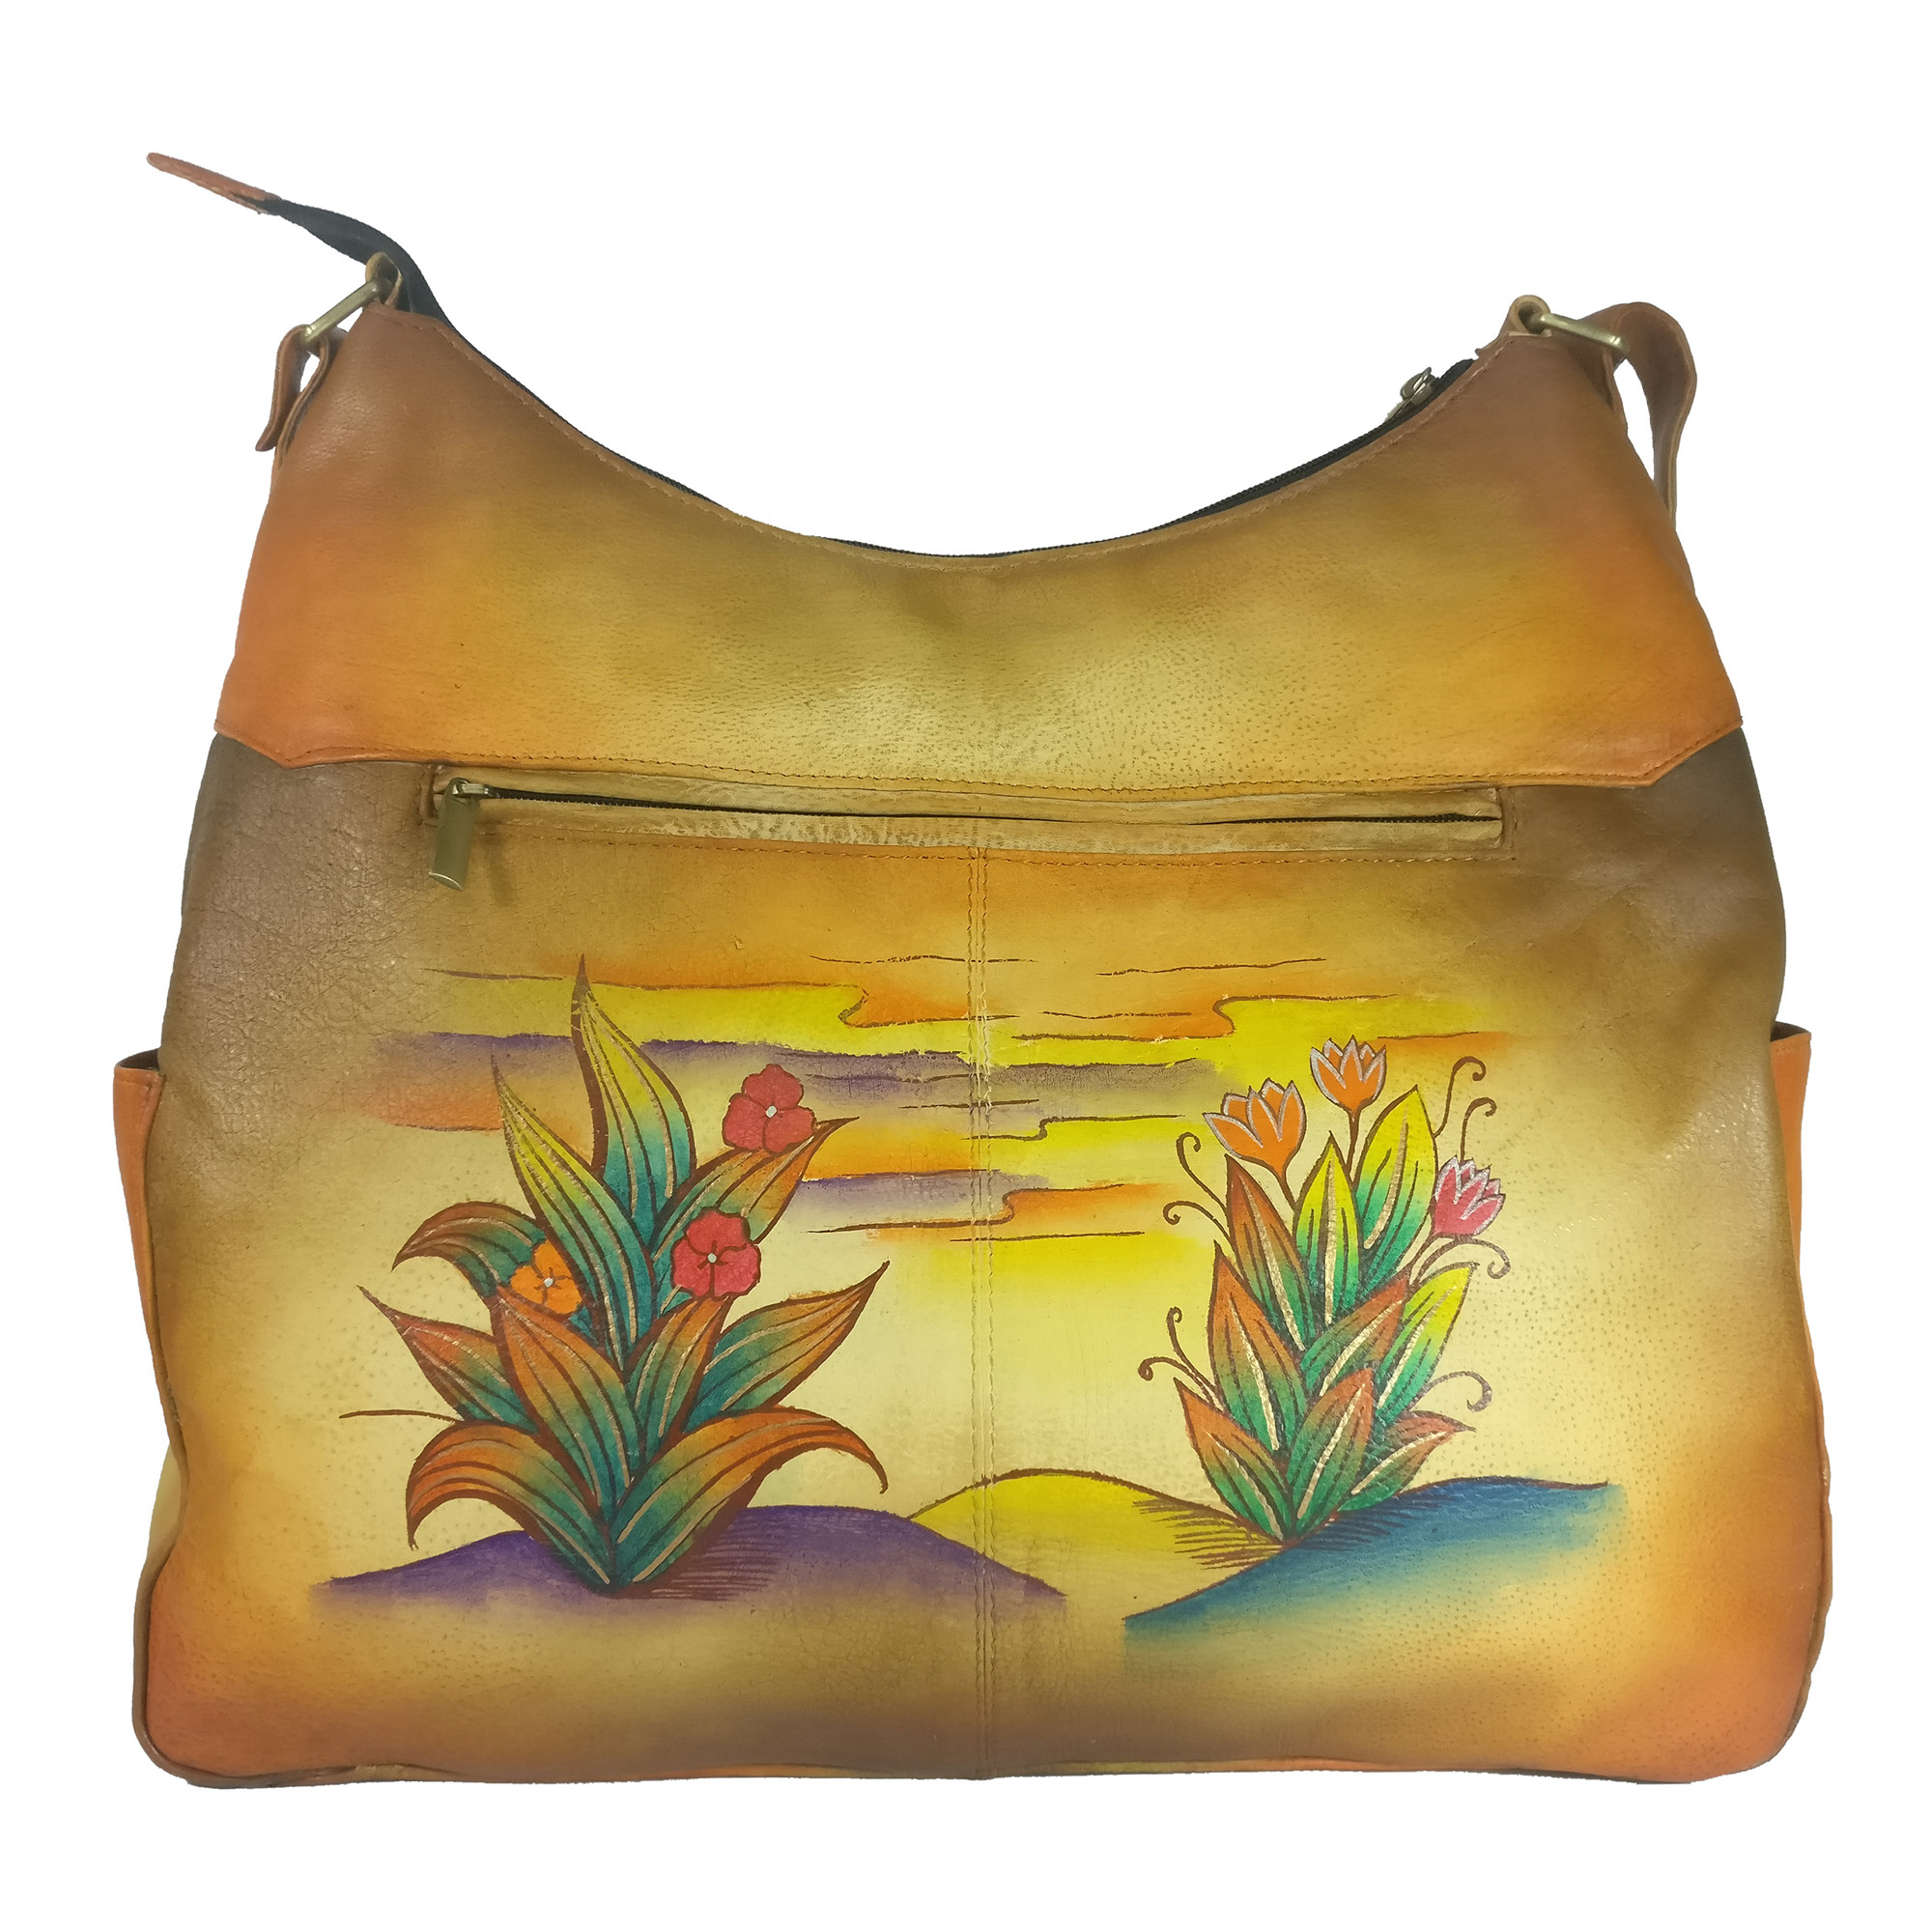 Charmeine Hand Painted Horse-1 Leather Shoulder Bag - Bags and Belts ...